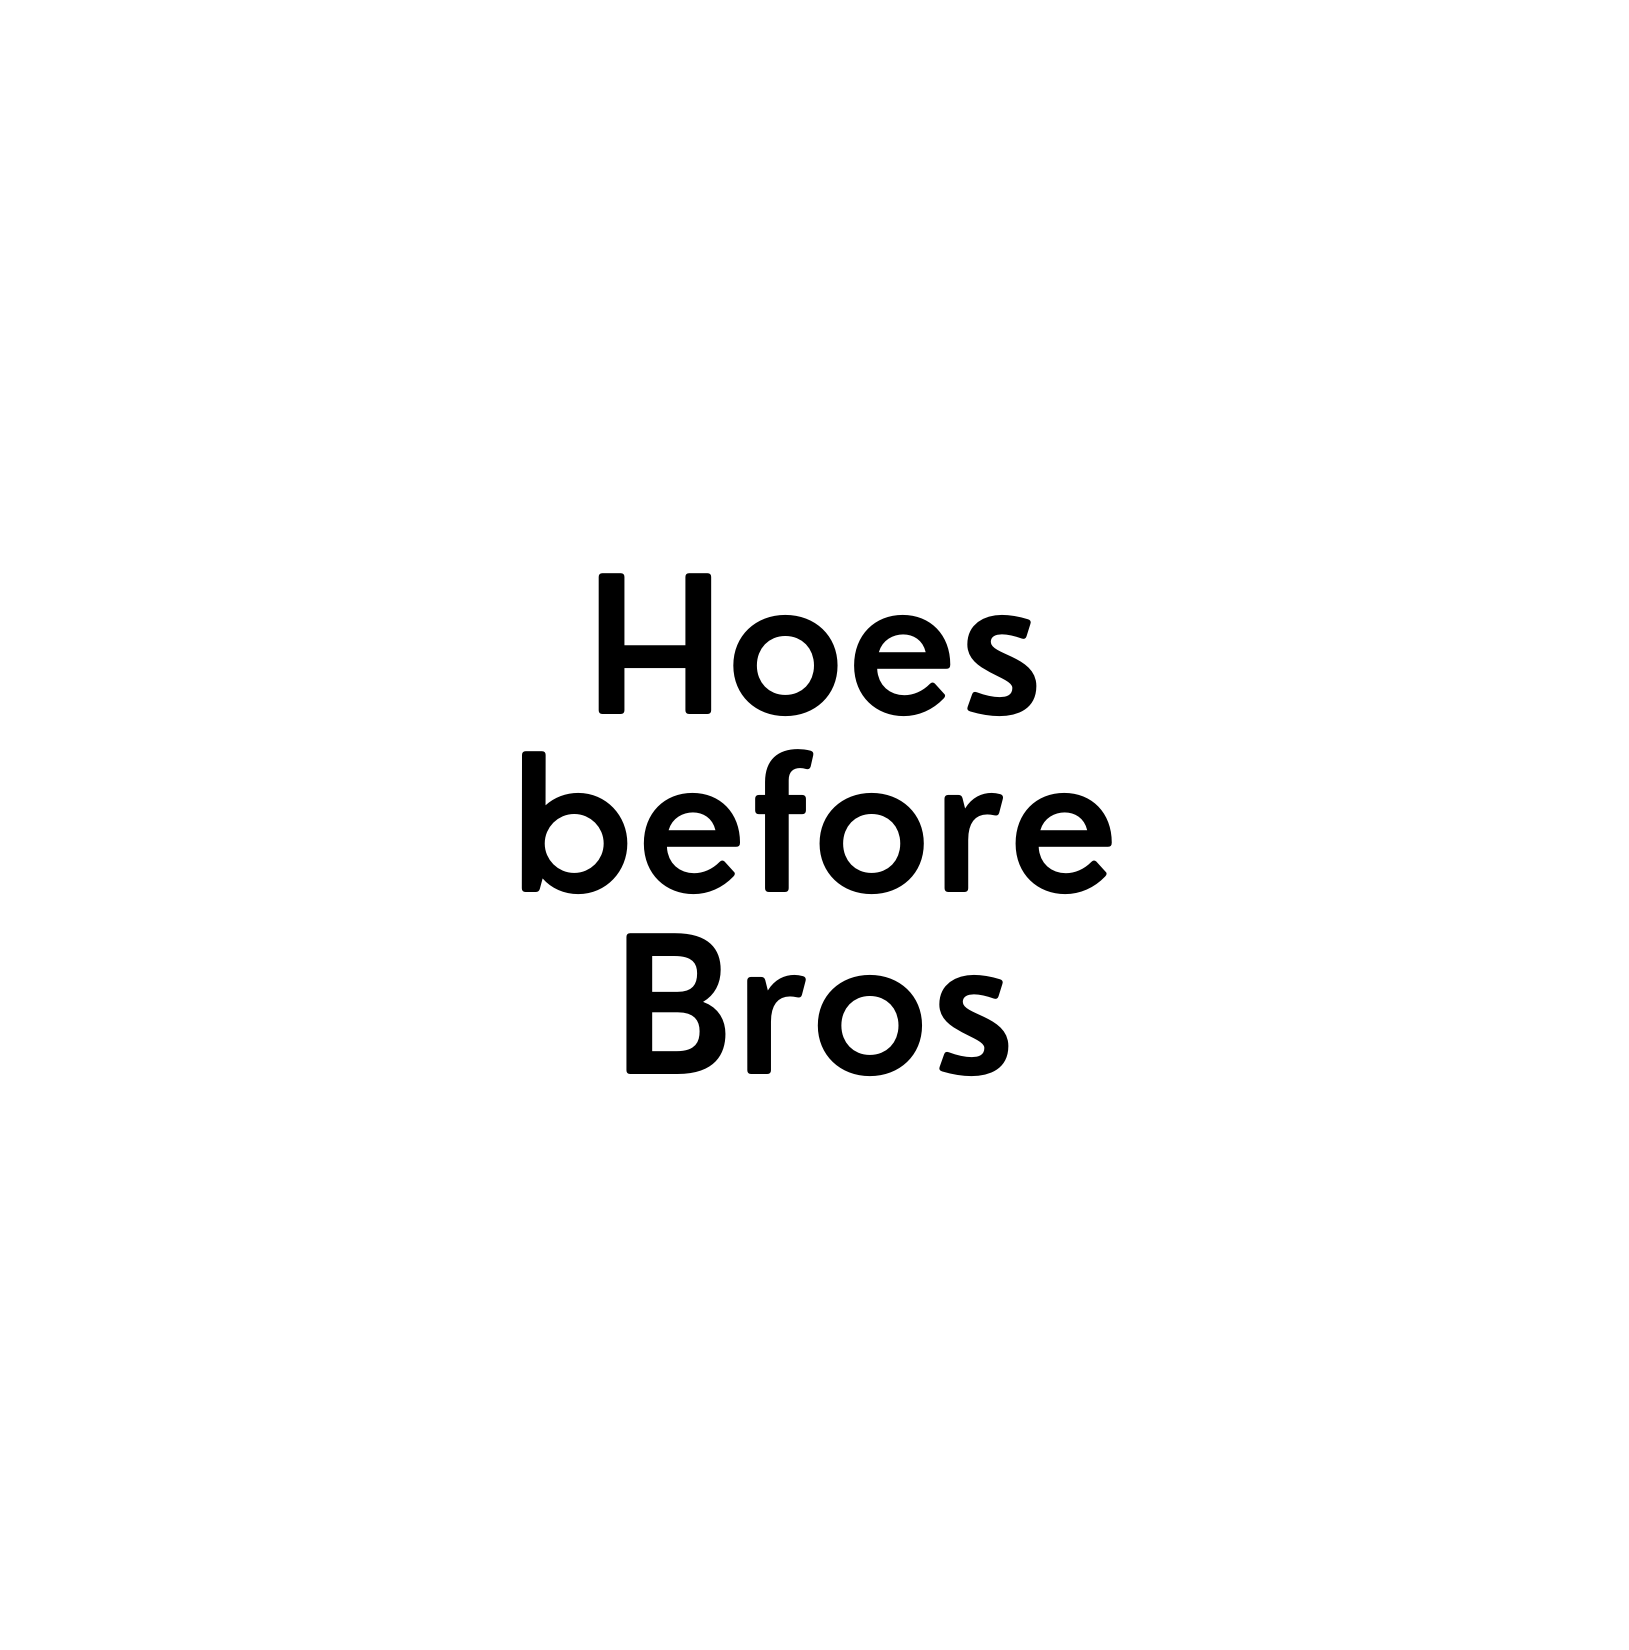 White seed paper greeting card saying "Hoes before Bros"